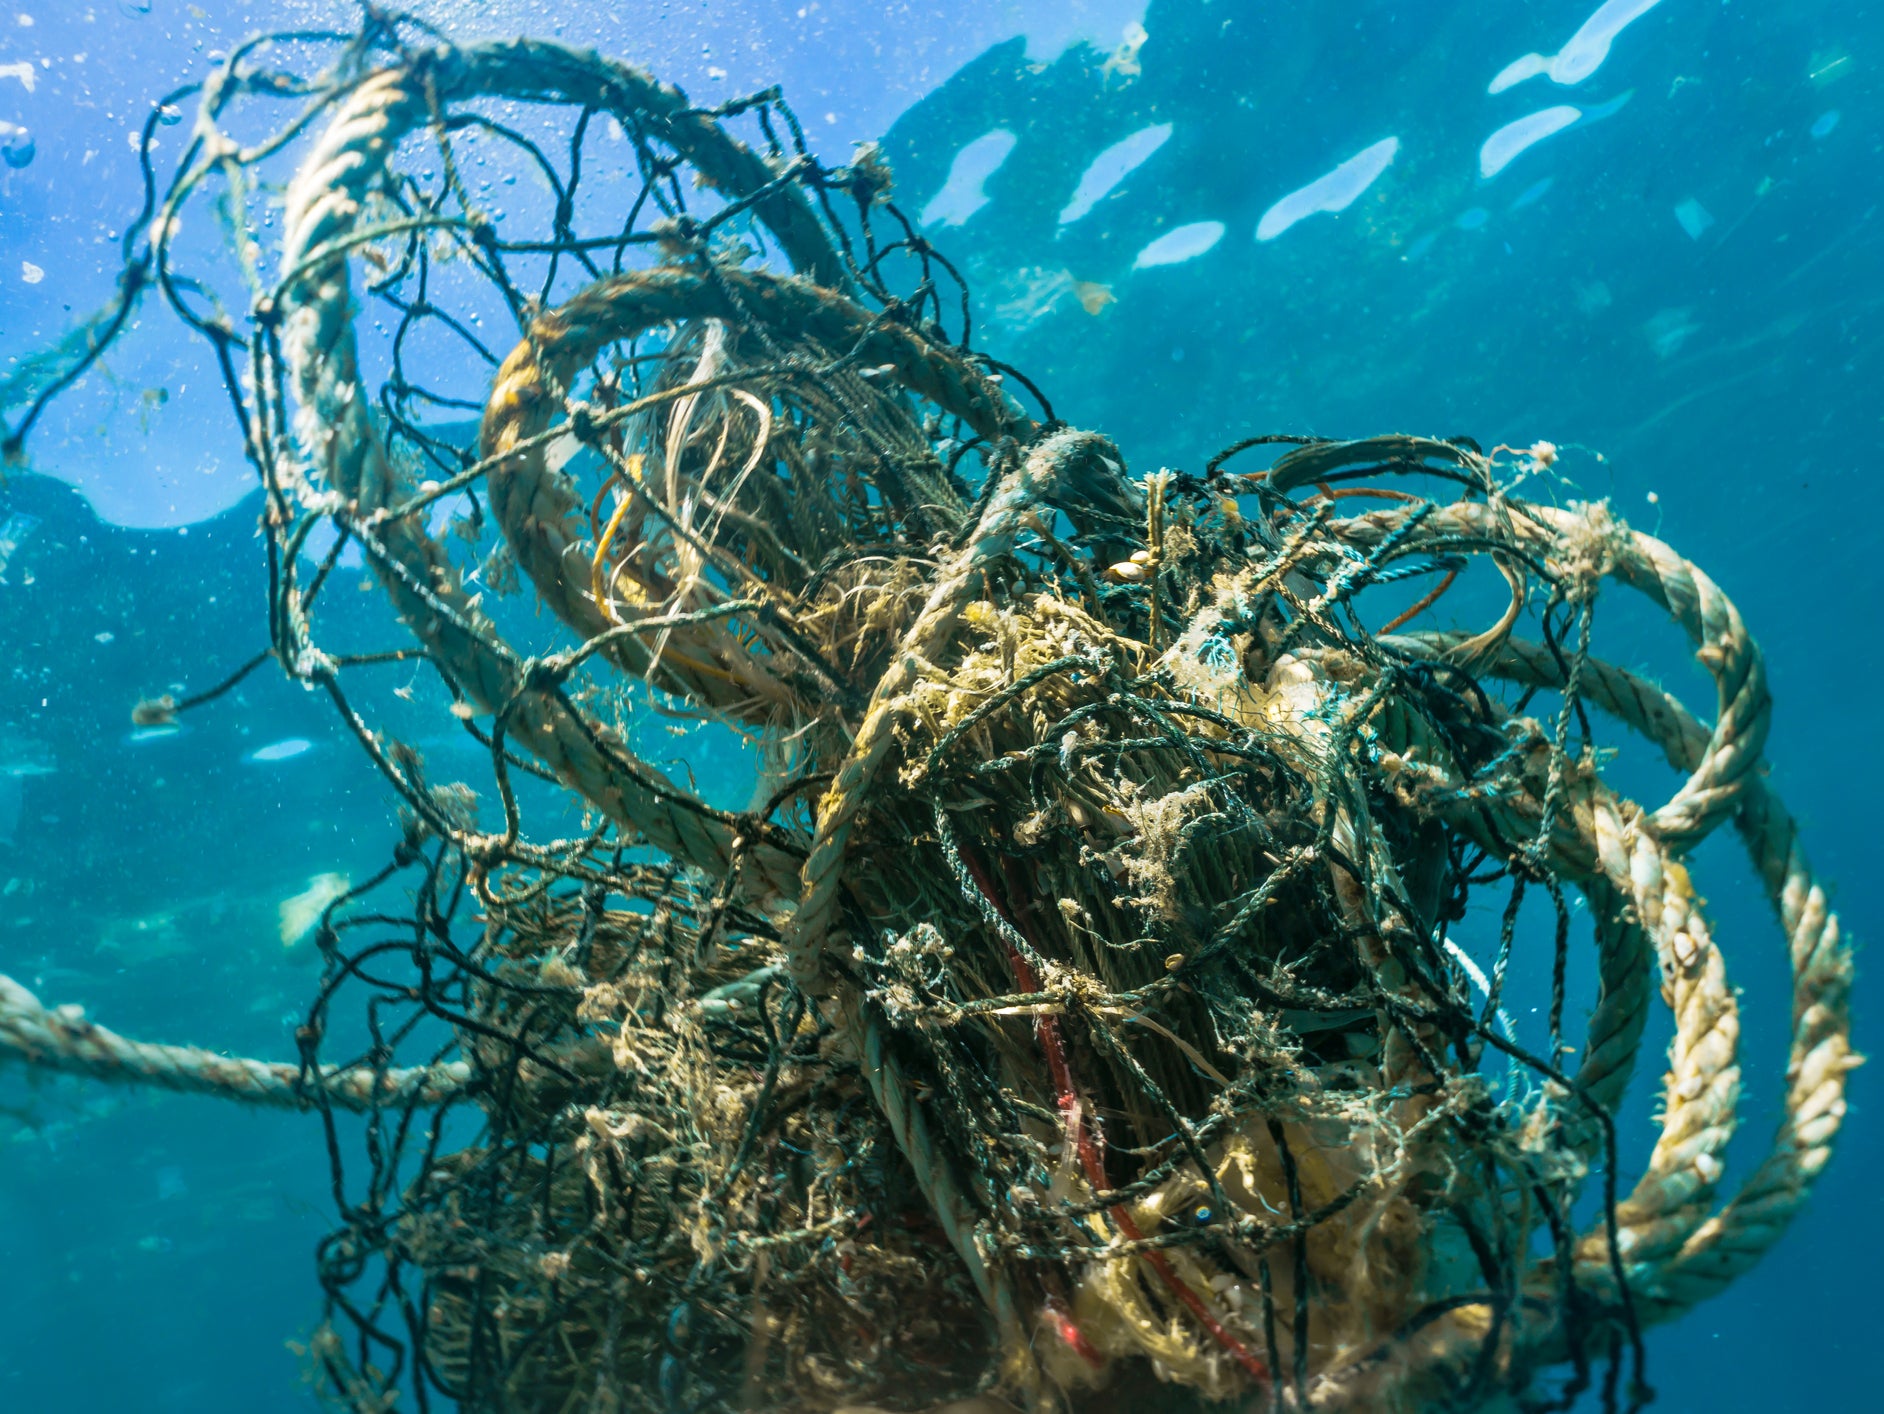 Up to one million tonnes of ‘deadly’ fishing gear left in ocean each year, WWF warns